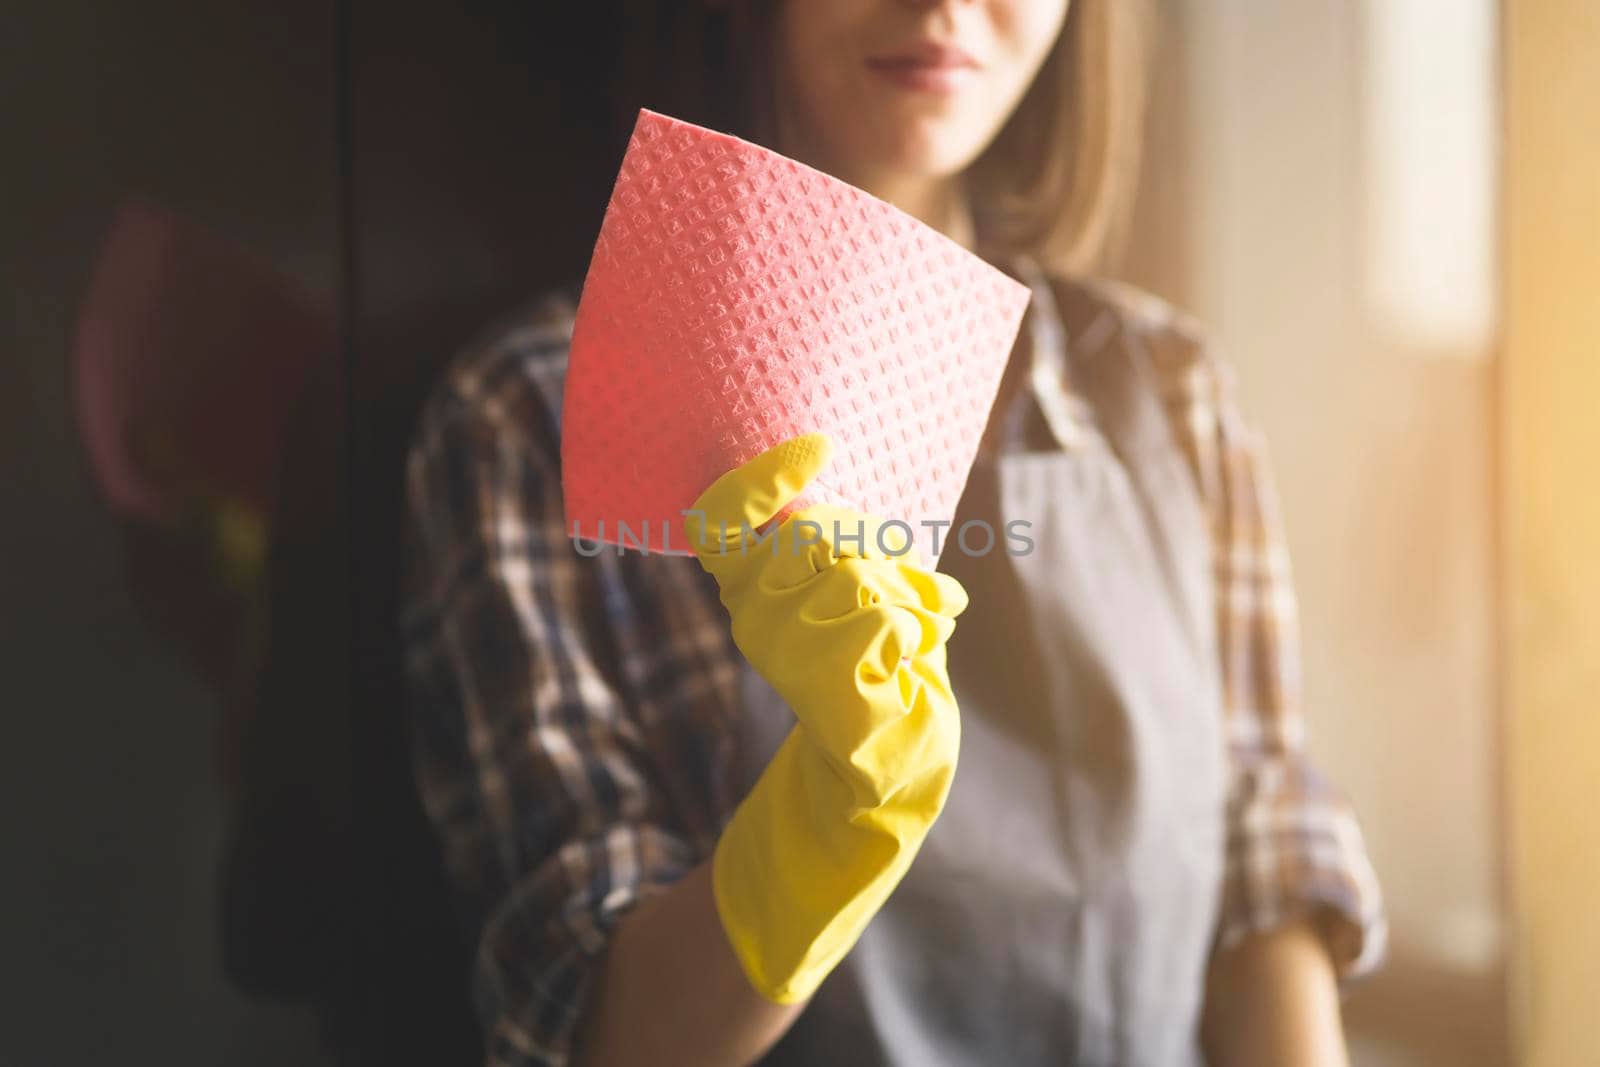 Young female hands in yellow rubber gloves hold a new pink sponge for cleaning the house and wiping surfaces. A female housekeeper in a plaid shirt and a gray apron holds a rag and plans to disinfect.